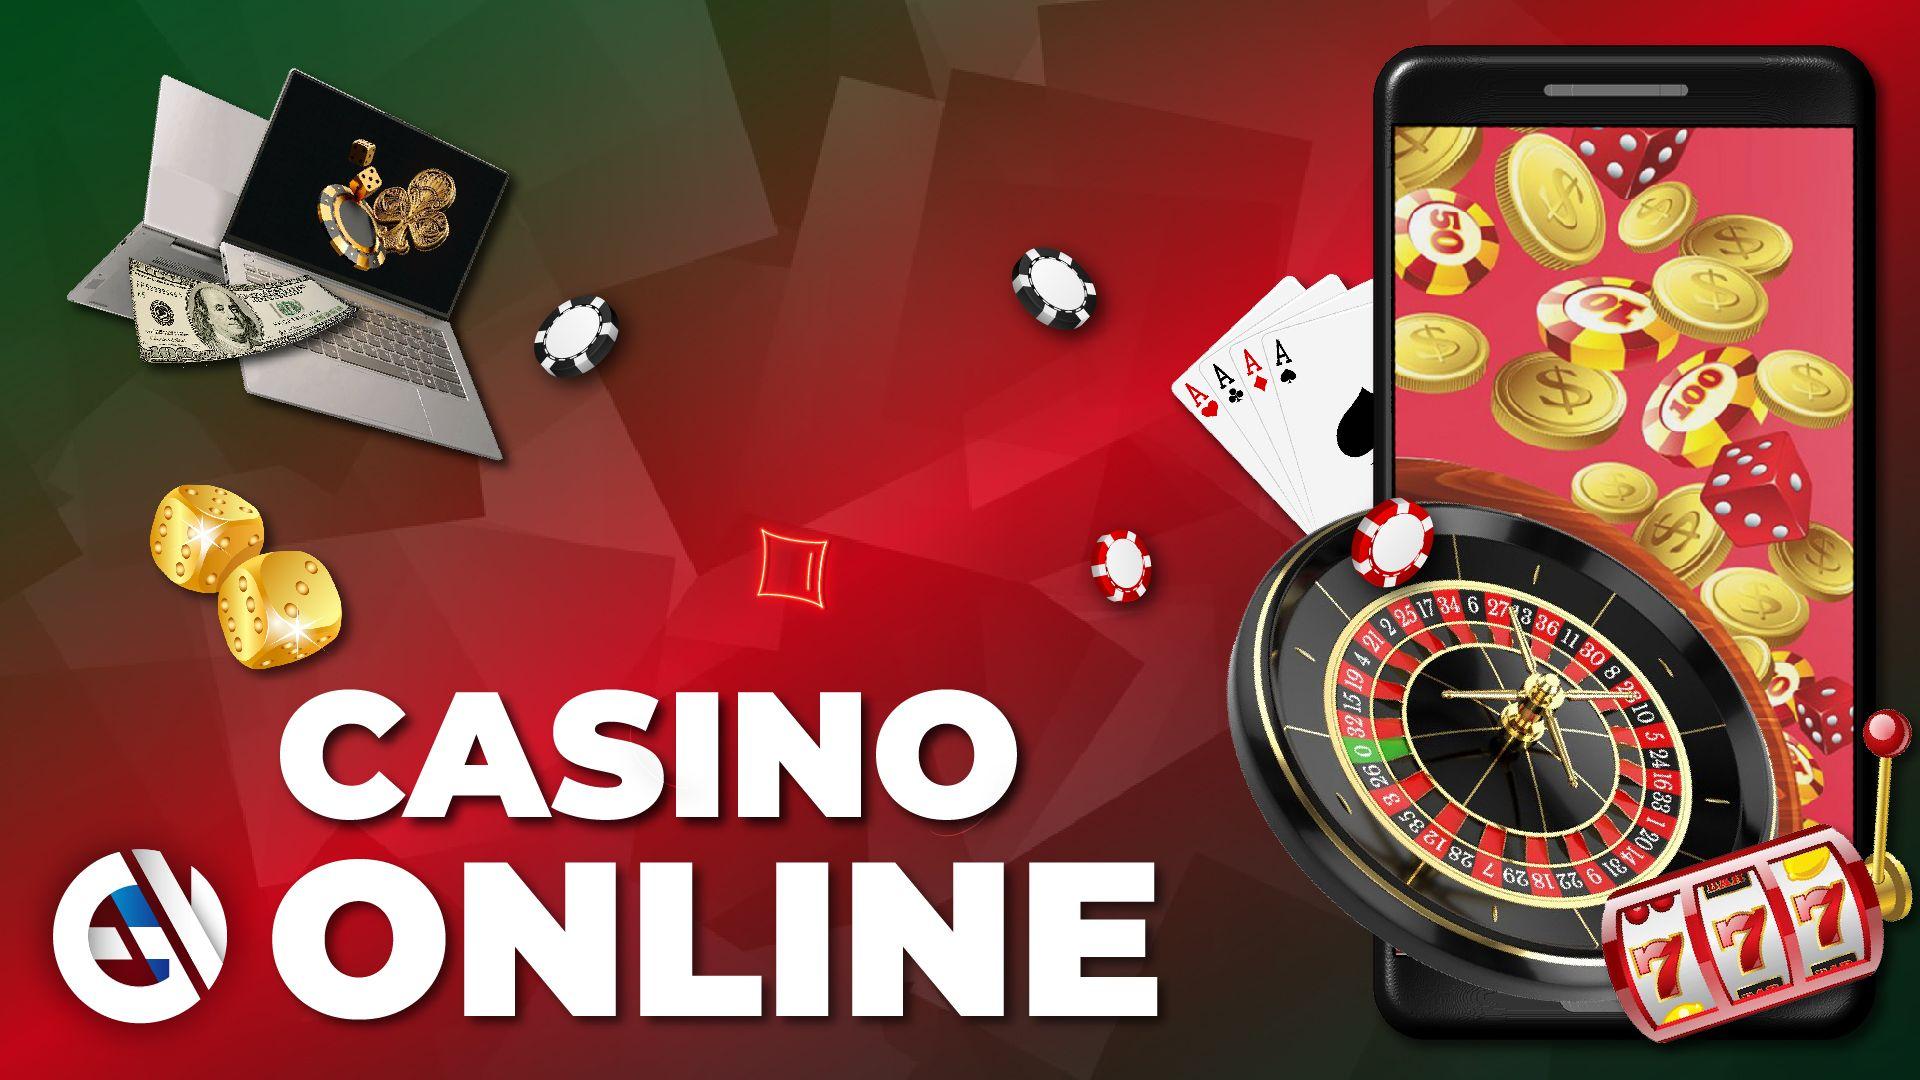 How to Find the Best Online Casinos - Tips for Players